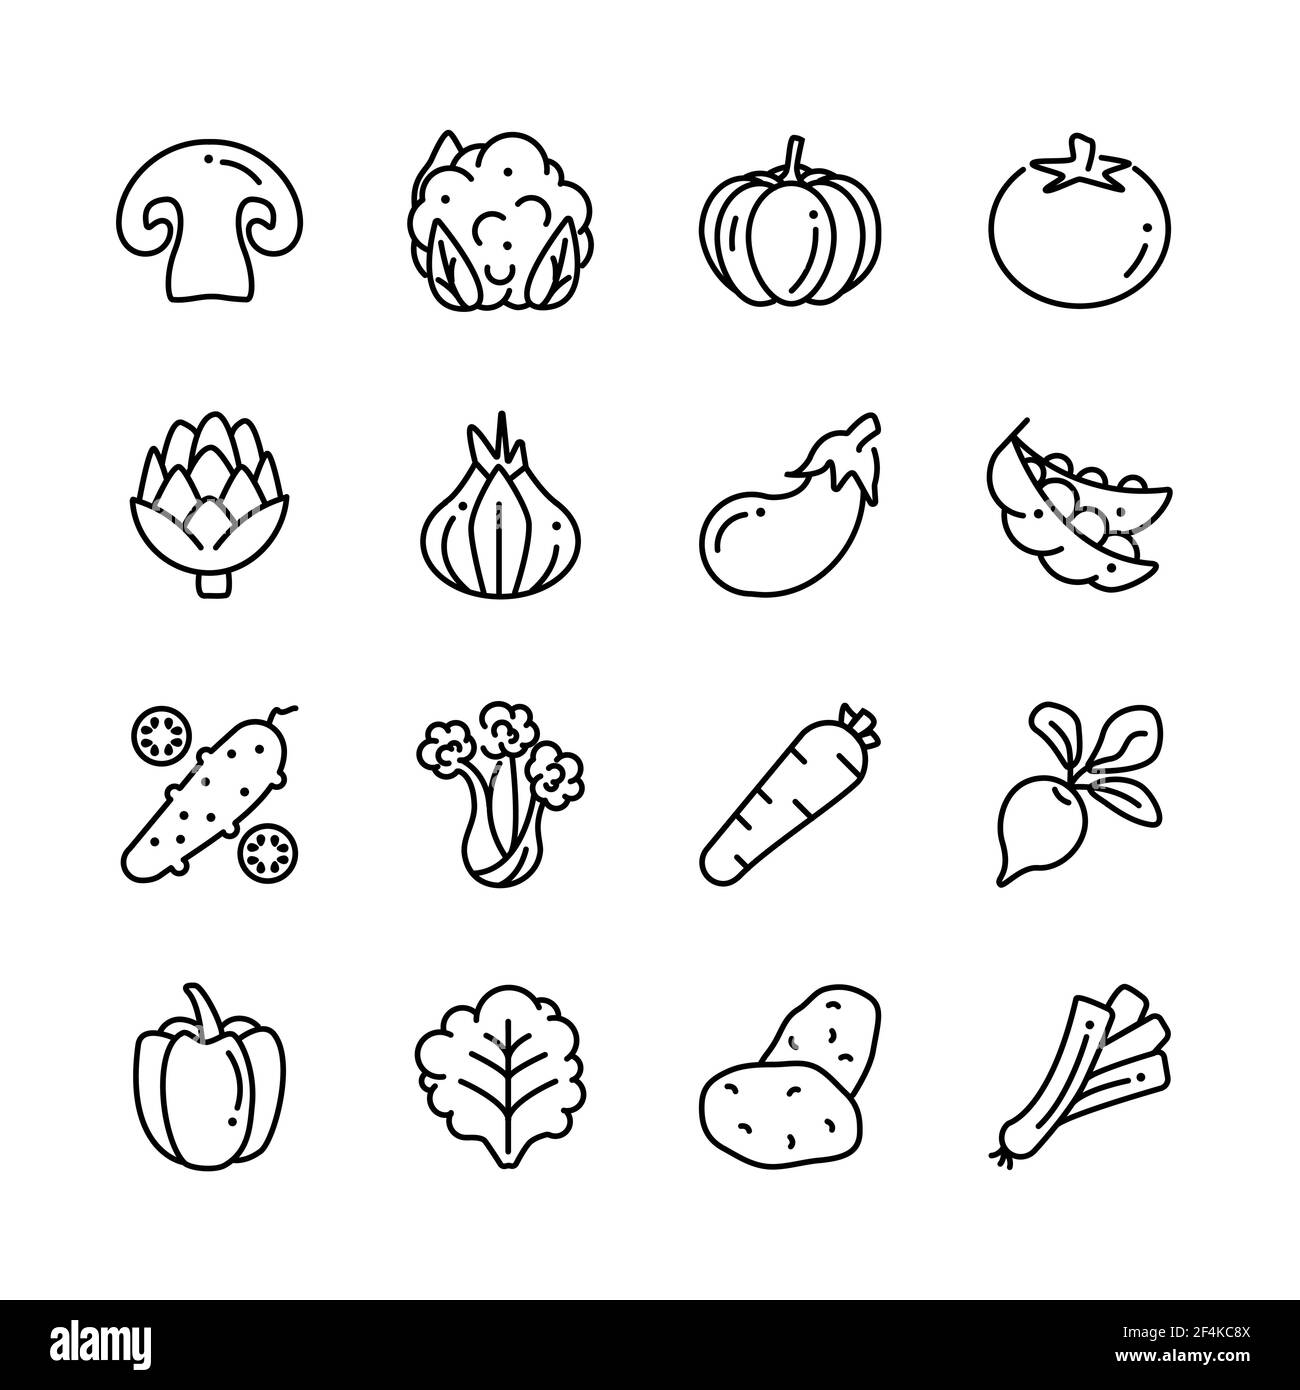 Veggies organic products illustrations. Vegetarian, vegetable  contain potatoes, mushrooms, tomato, cabbage outline icons collection. Stock Vector